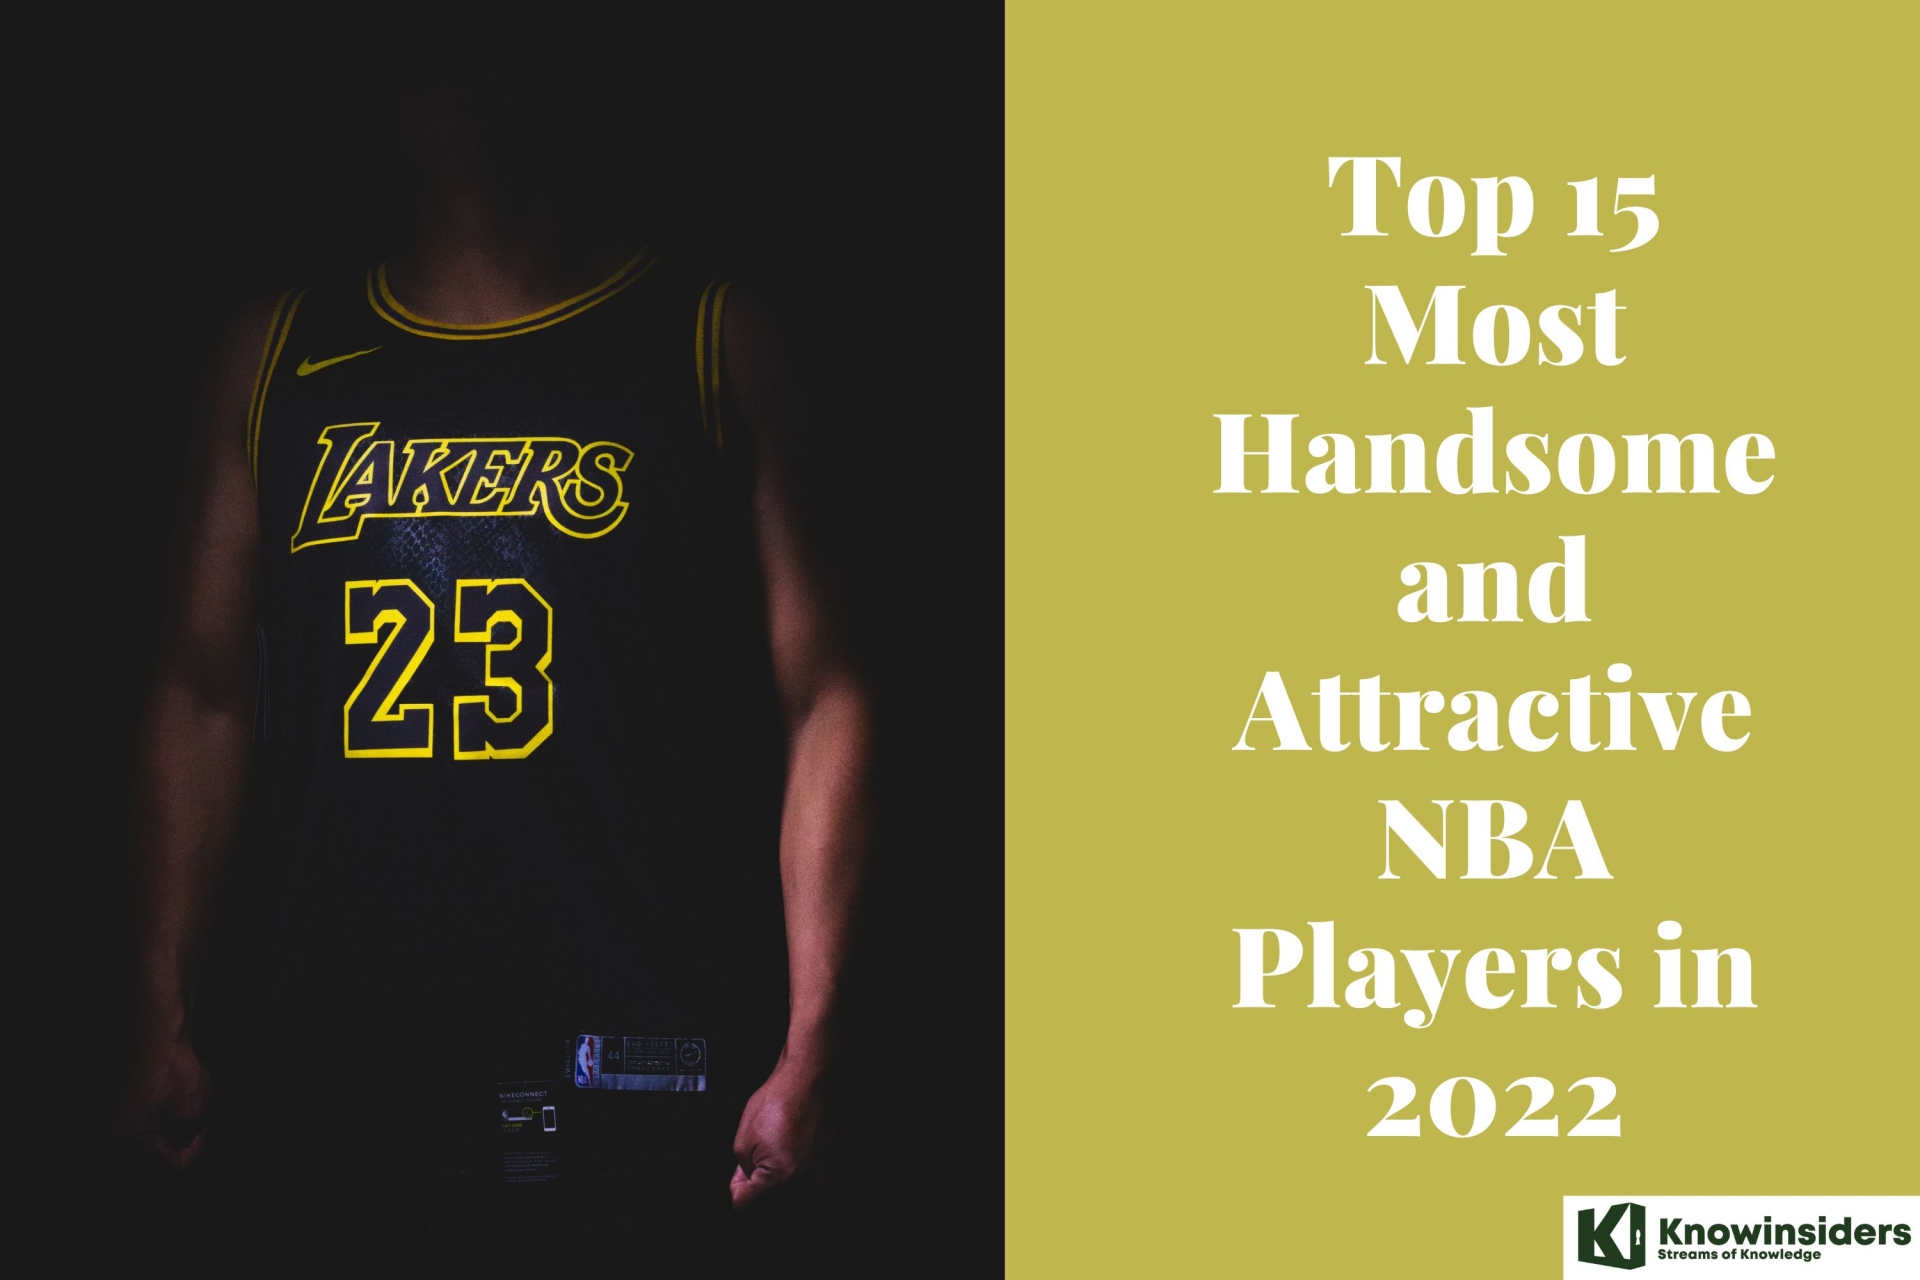 Top 15 Most Handsome and Hottest NBA Players 2022/2023